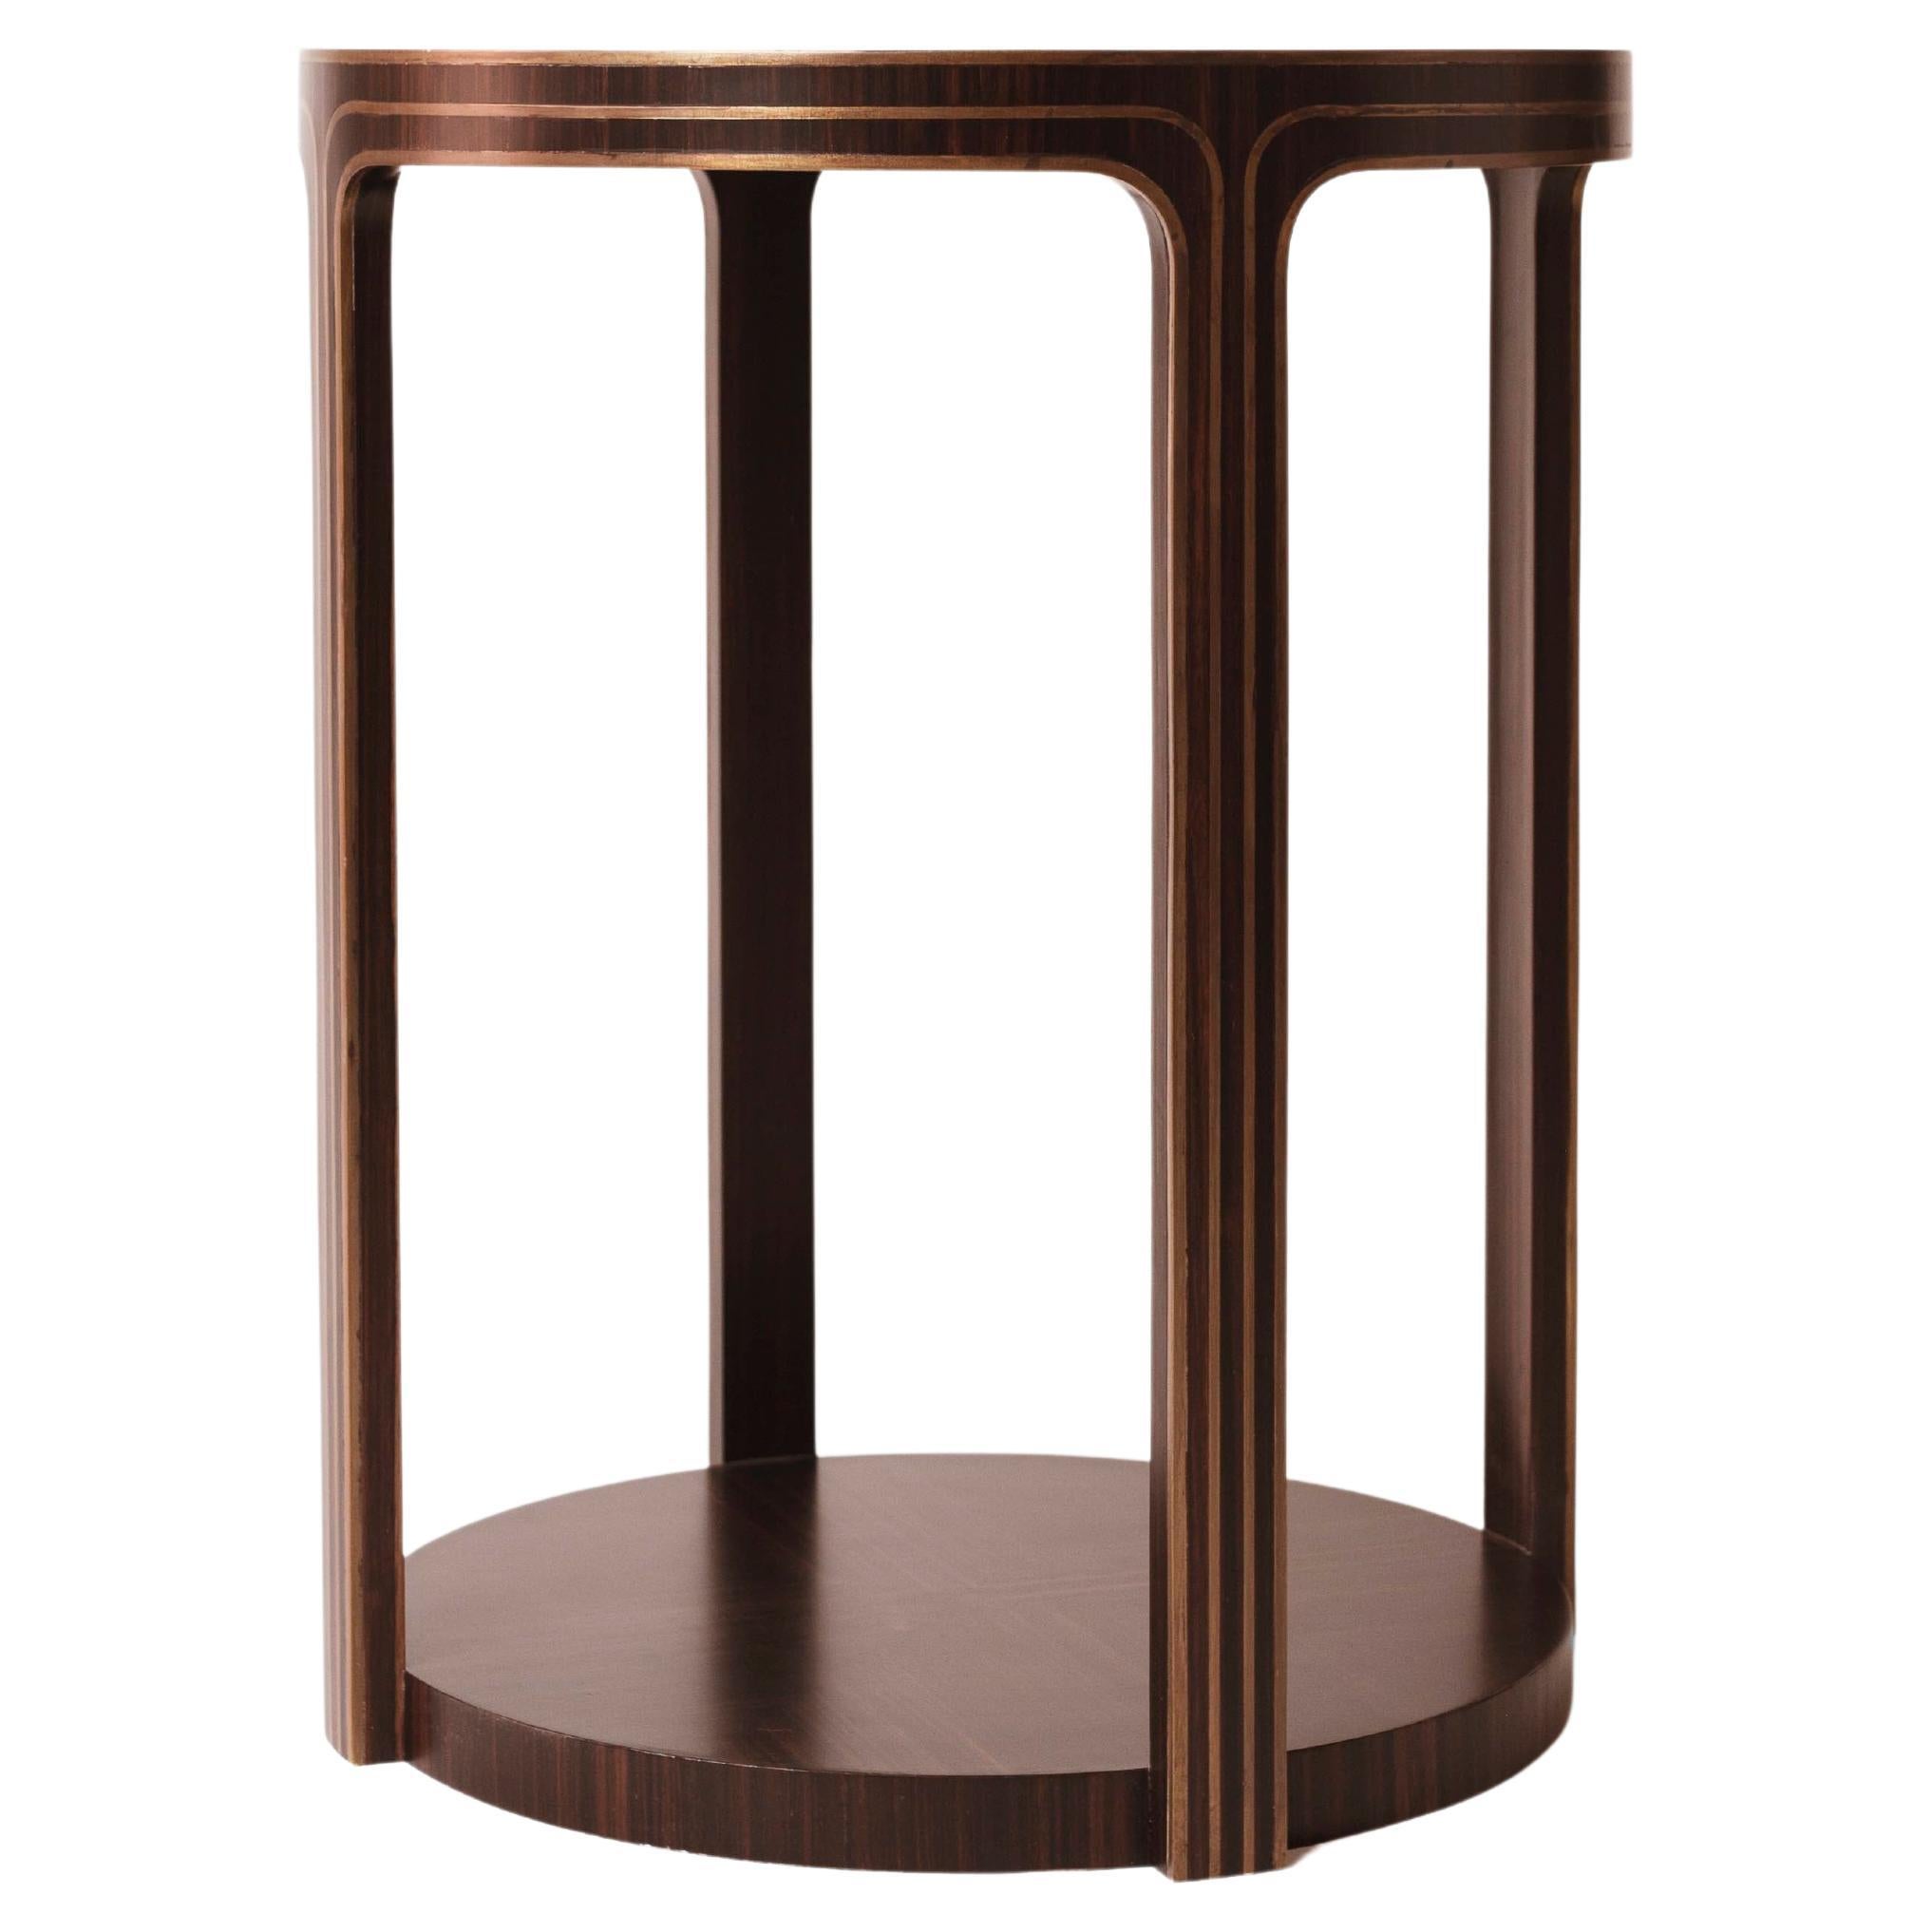 Art Deco Side Style Table in Oak with Ebony Veneer and Bronze Inlays For Sale